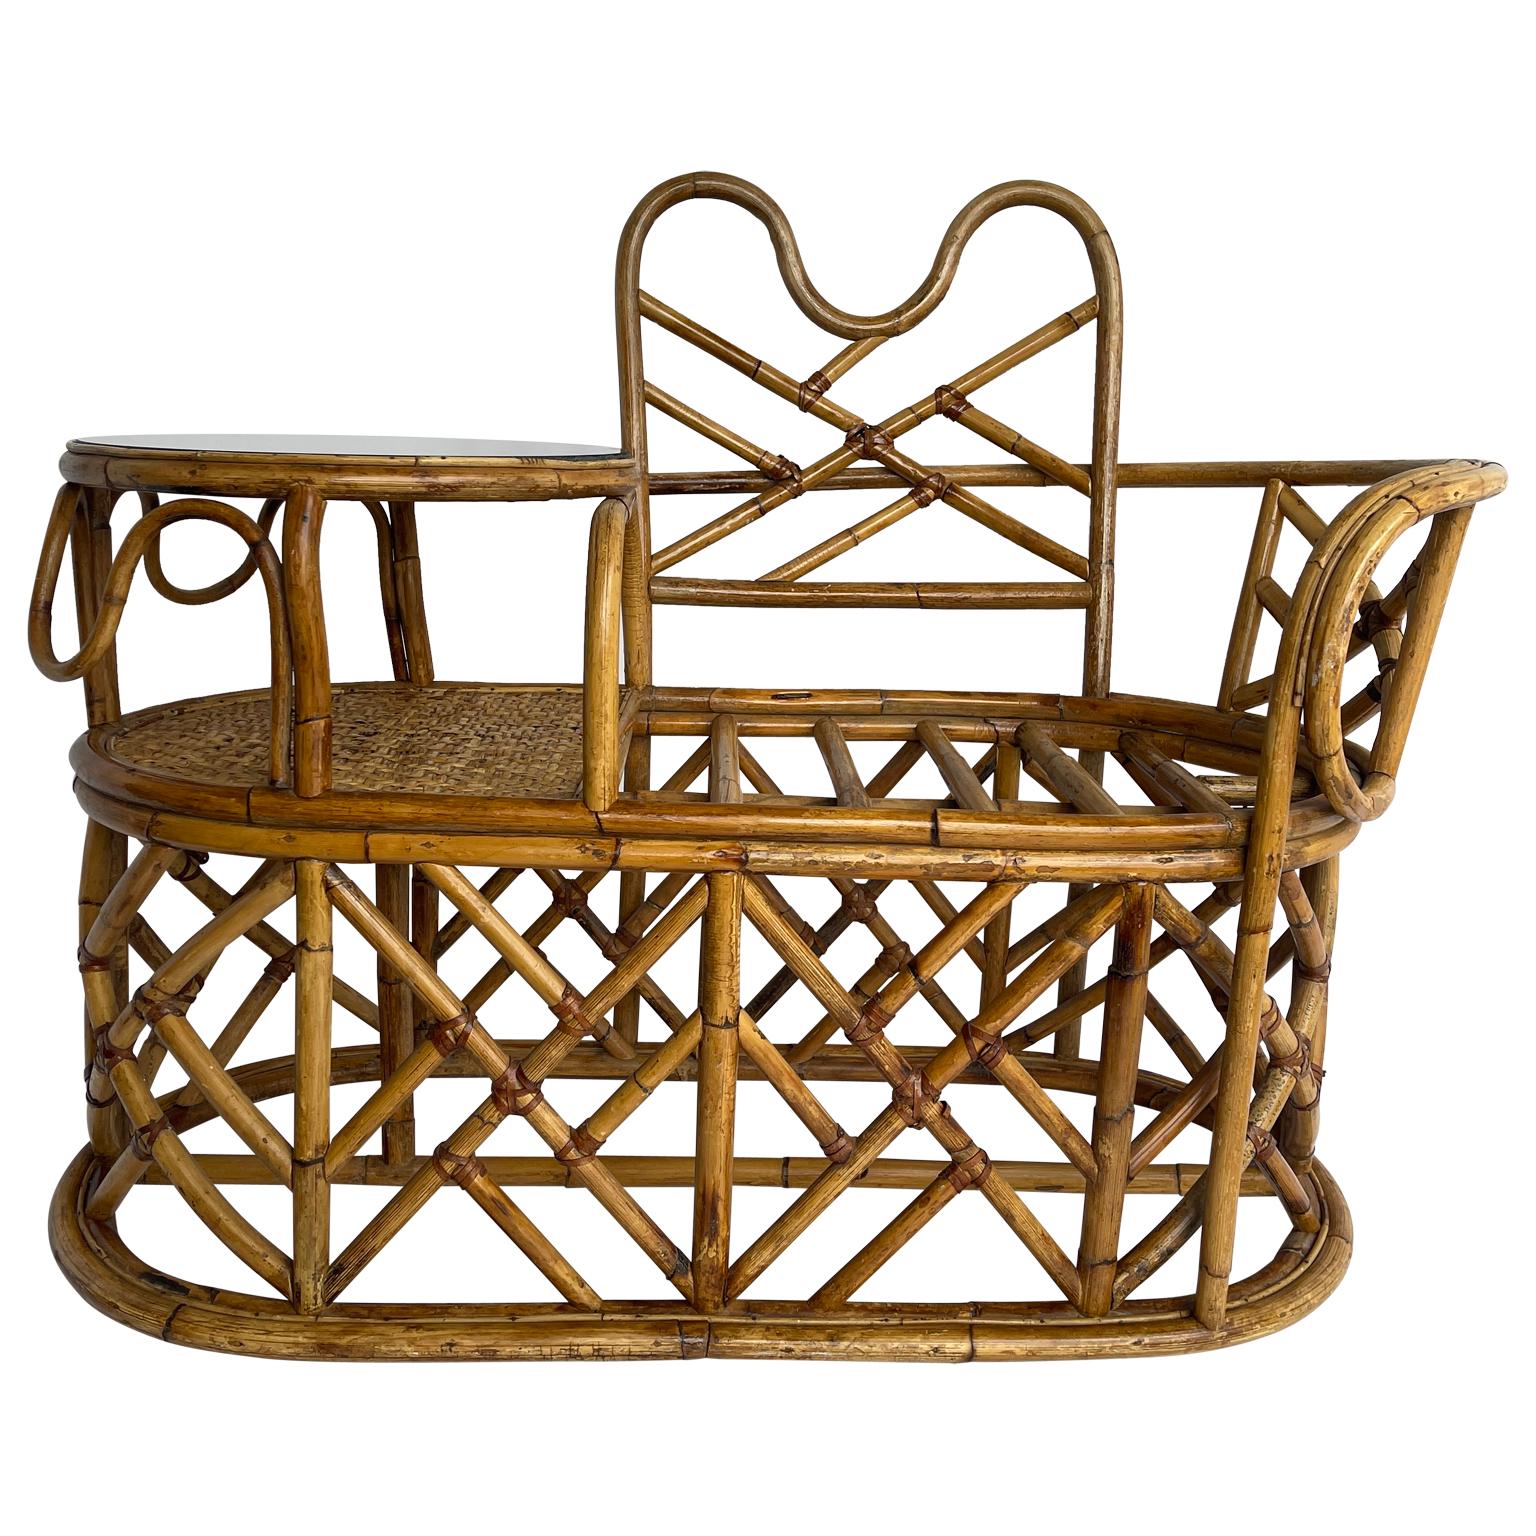 Mid-Century Modern Rattan gossip chair with glass side table. This lovely rattan chair or bench is as functional as it is beautiful and charming. The graceful curves of the rattan are elegant yet very sturdy. Picture yourself relaxing while chatting